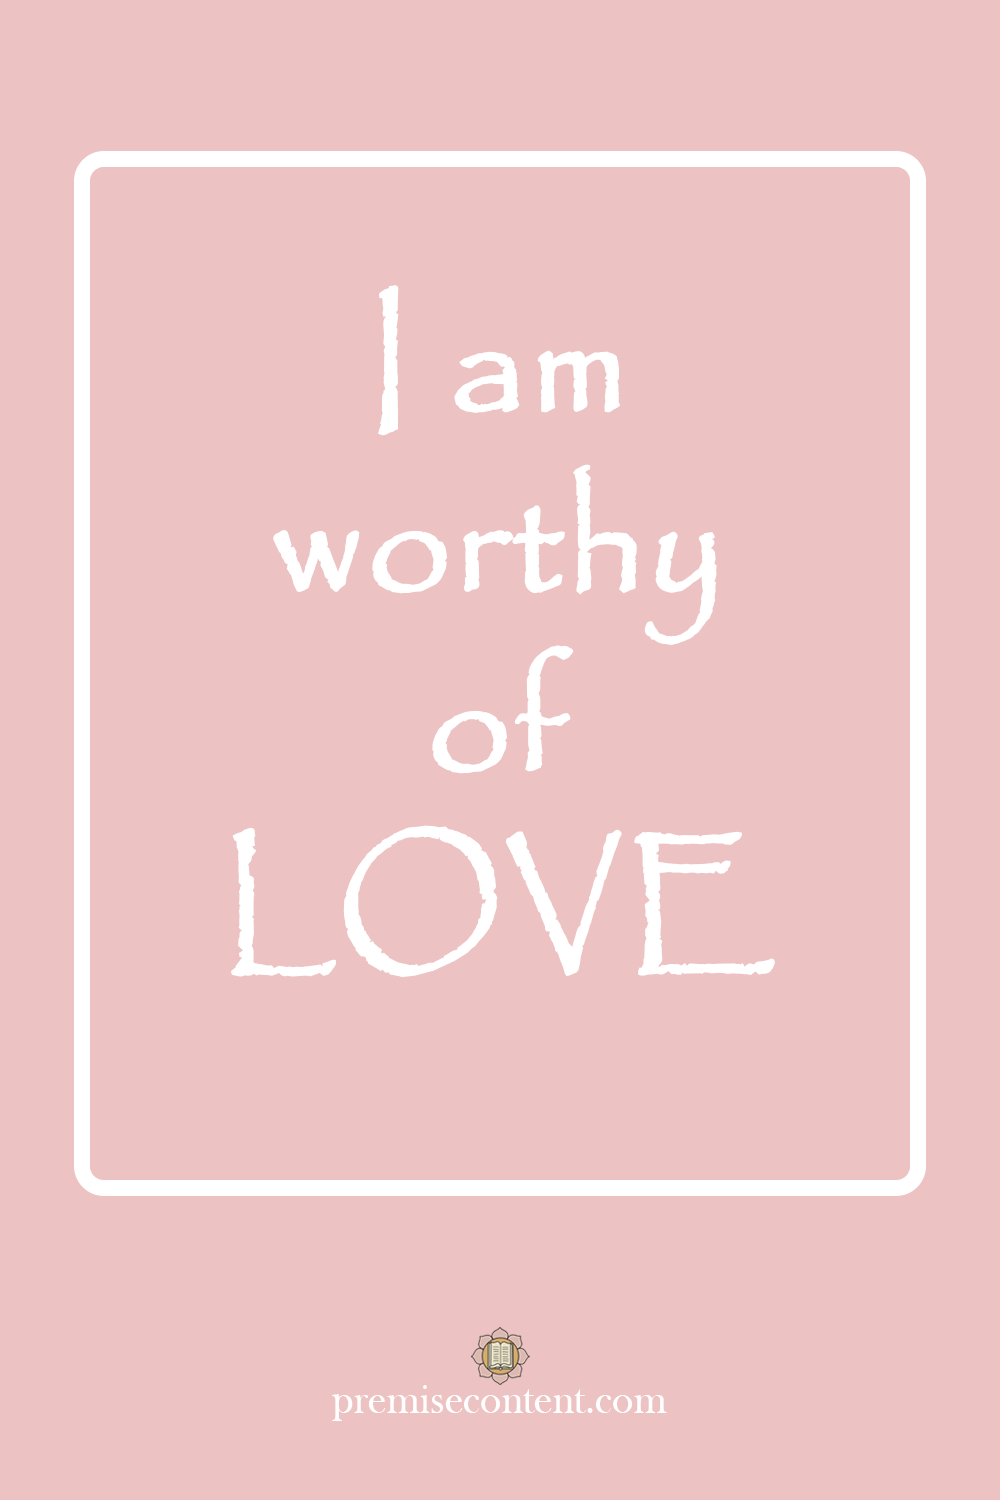 I am worthy of LOVE - Positive Affirmation